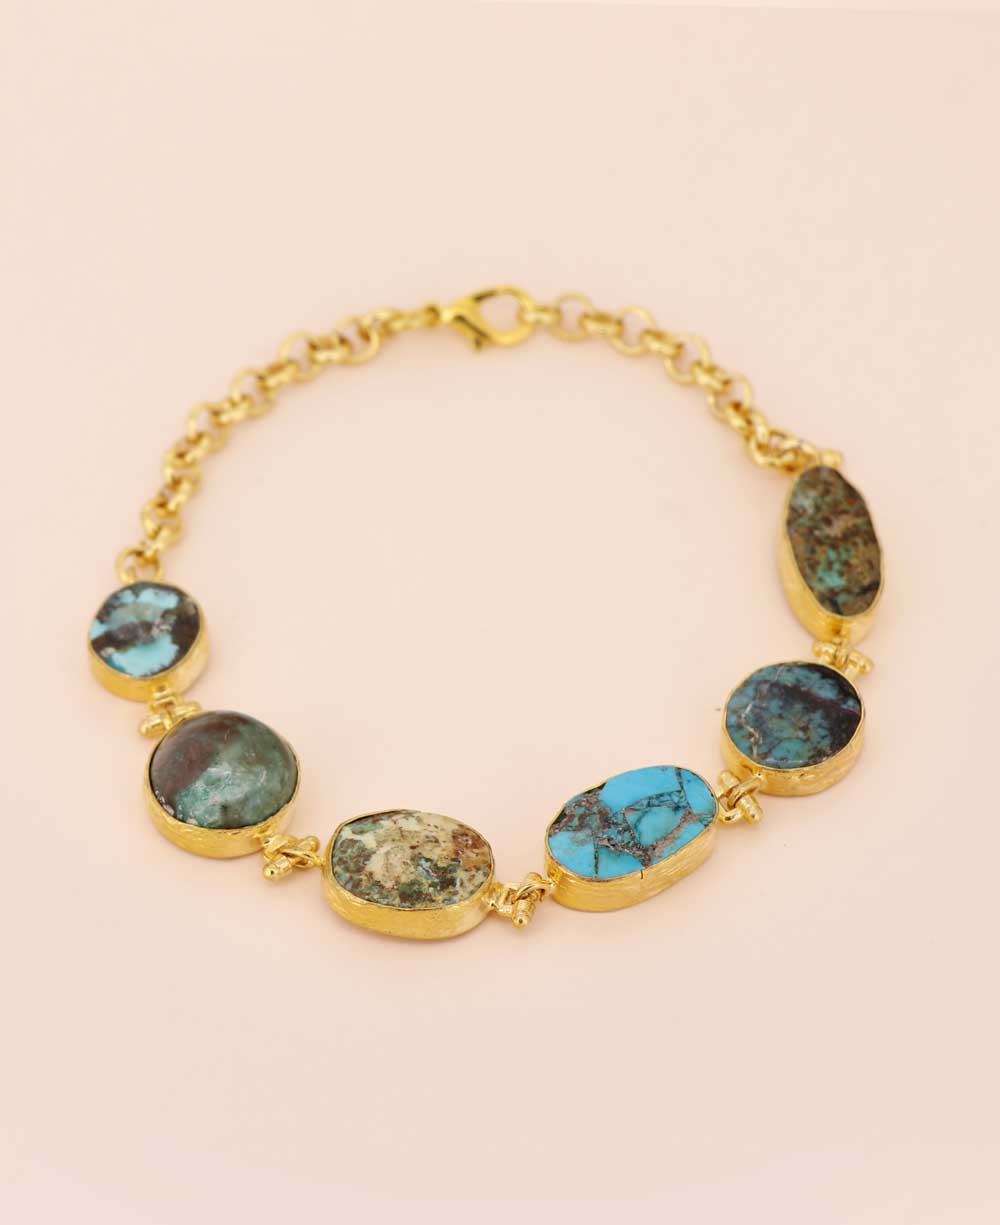 Unique Turquoise Gold Plated Brass Bracelet - Adjustable Length, Handcrafted in Turkey"